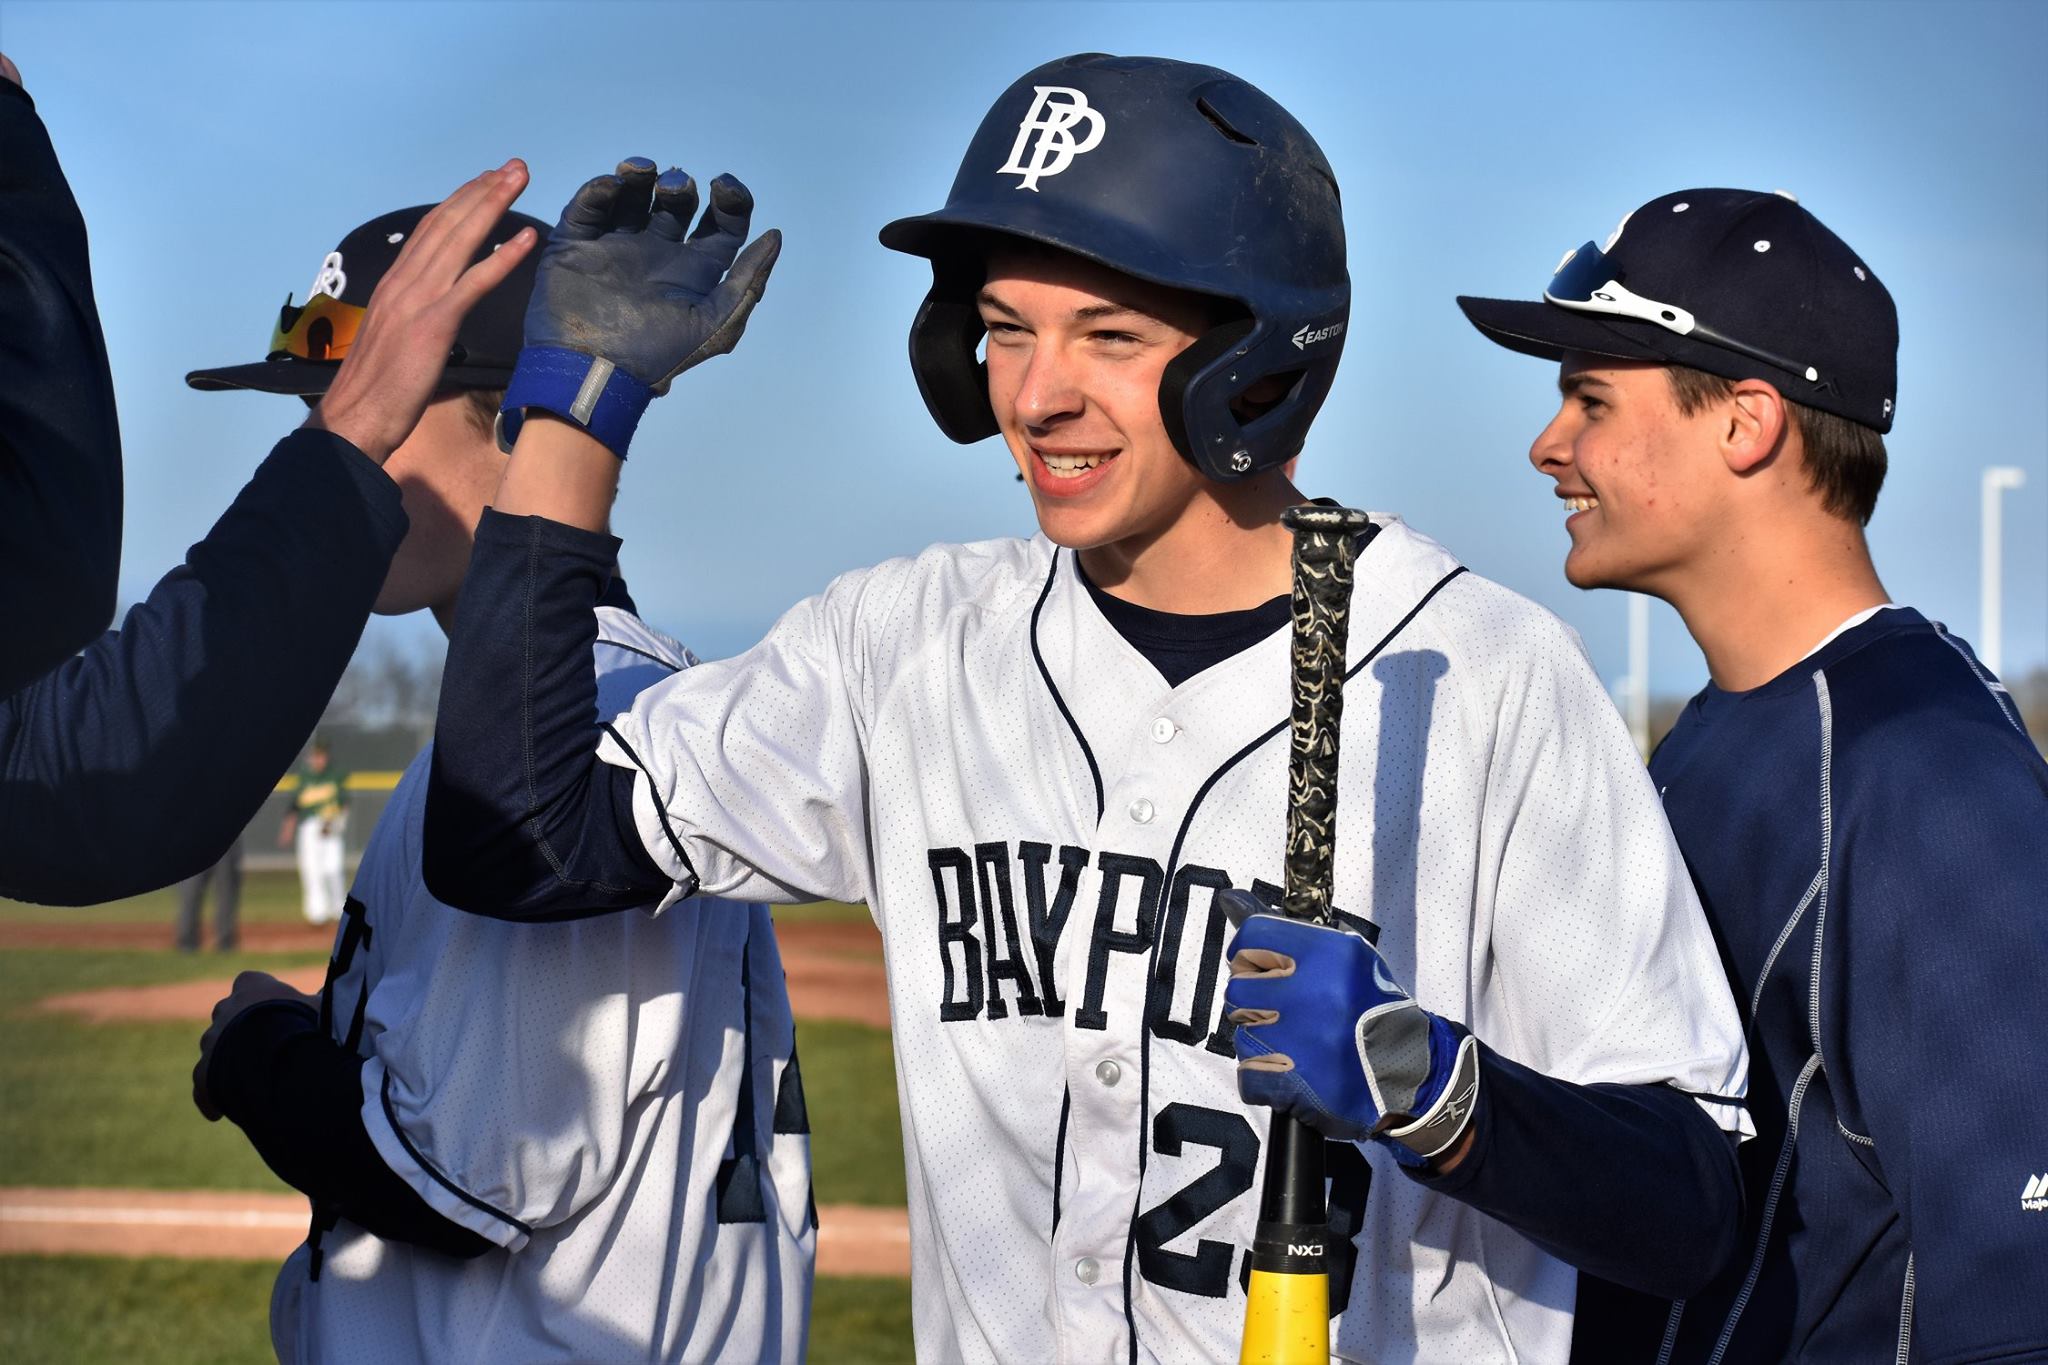 Looking to get back on top: Bay Port baseball preview